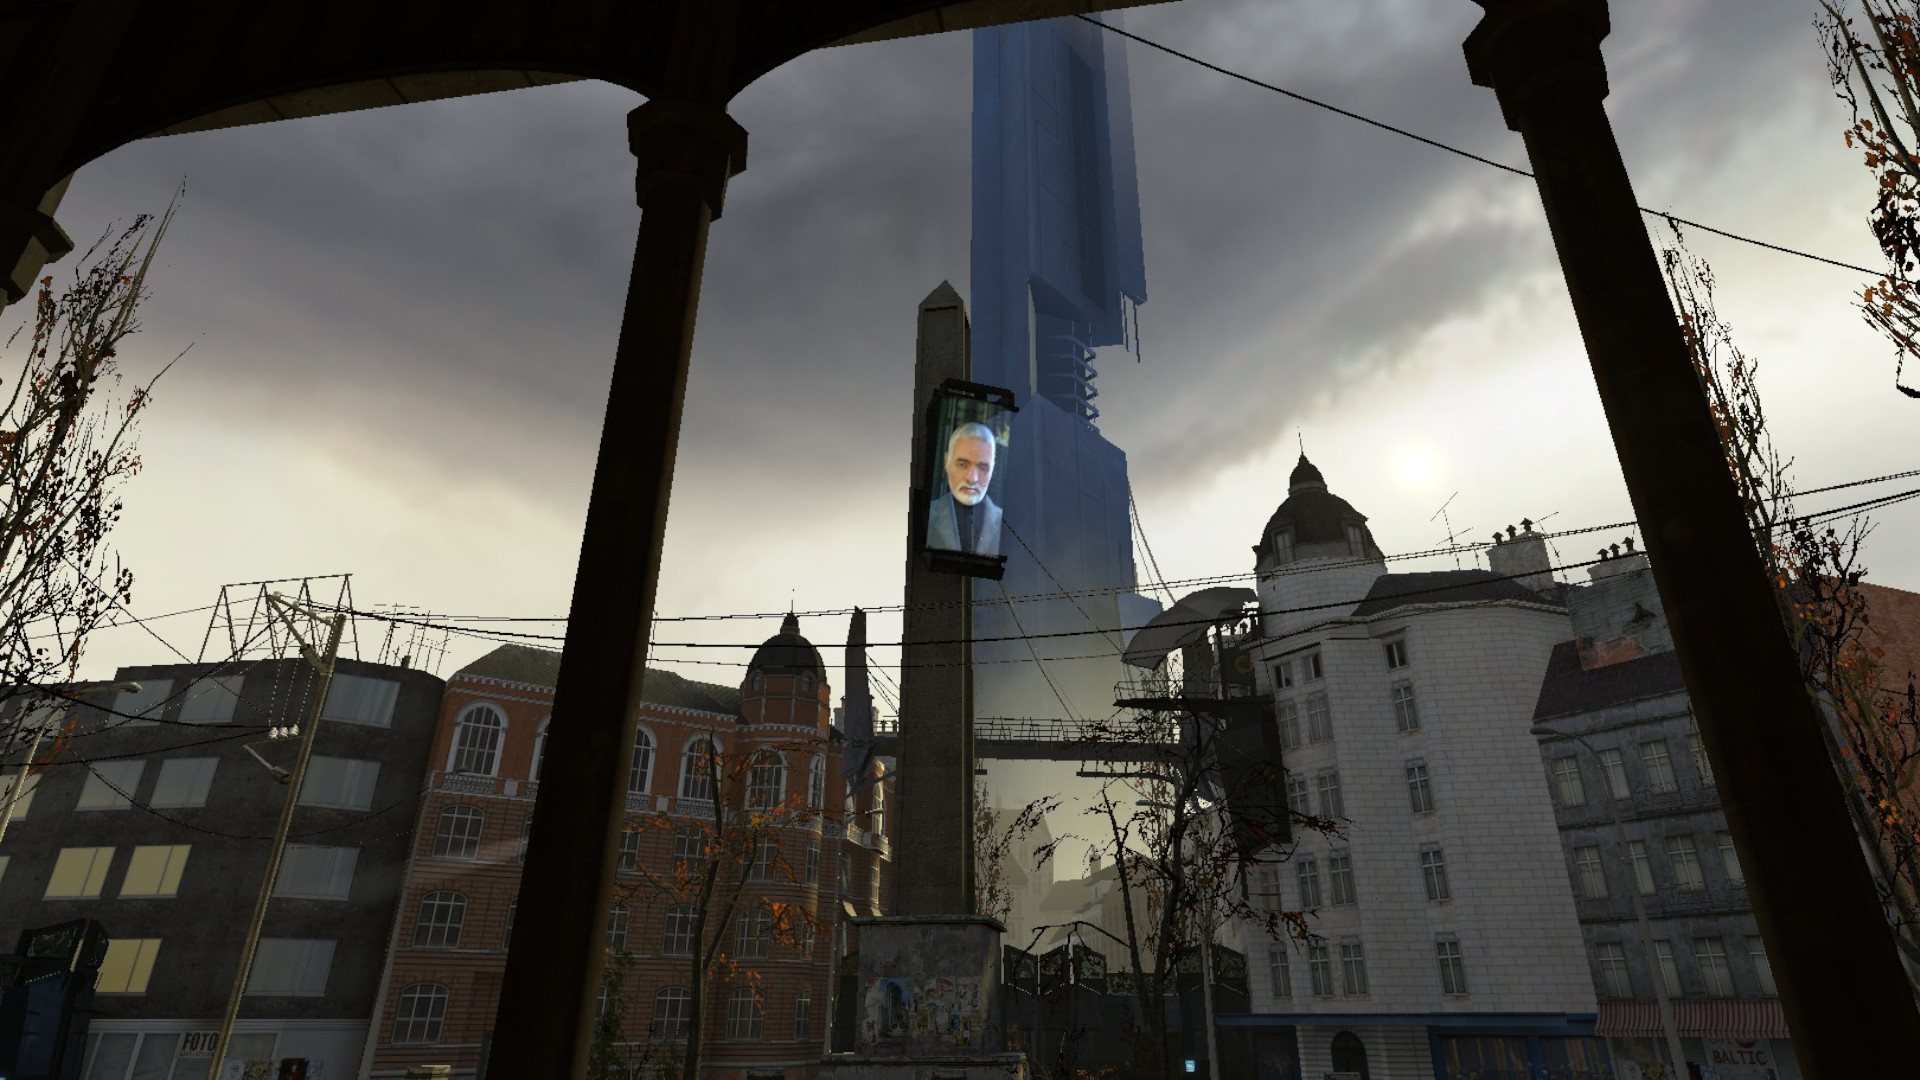 Half-Life 2 Chapter 1: City 17 main square, with the Citadel in the background